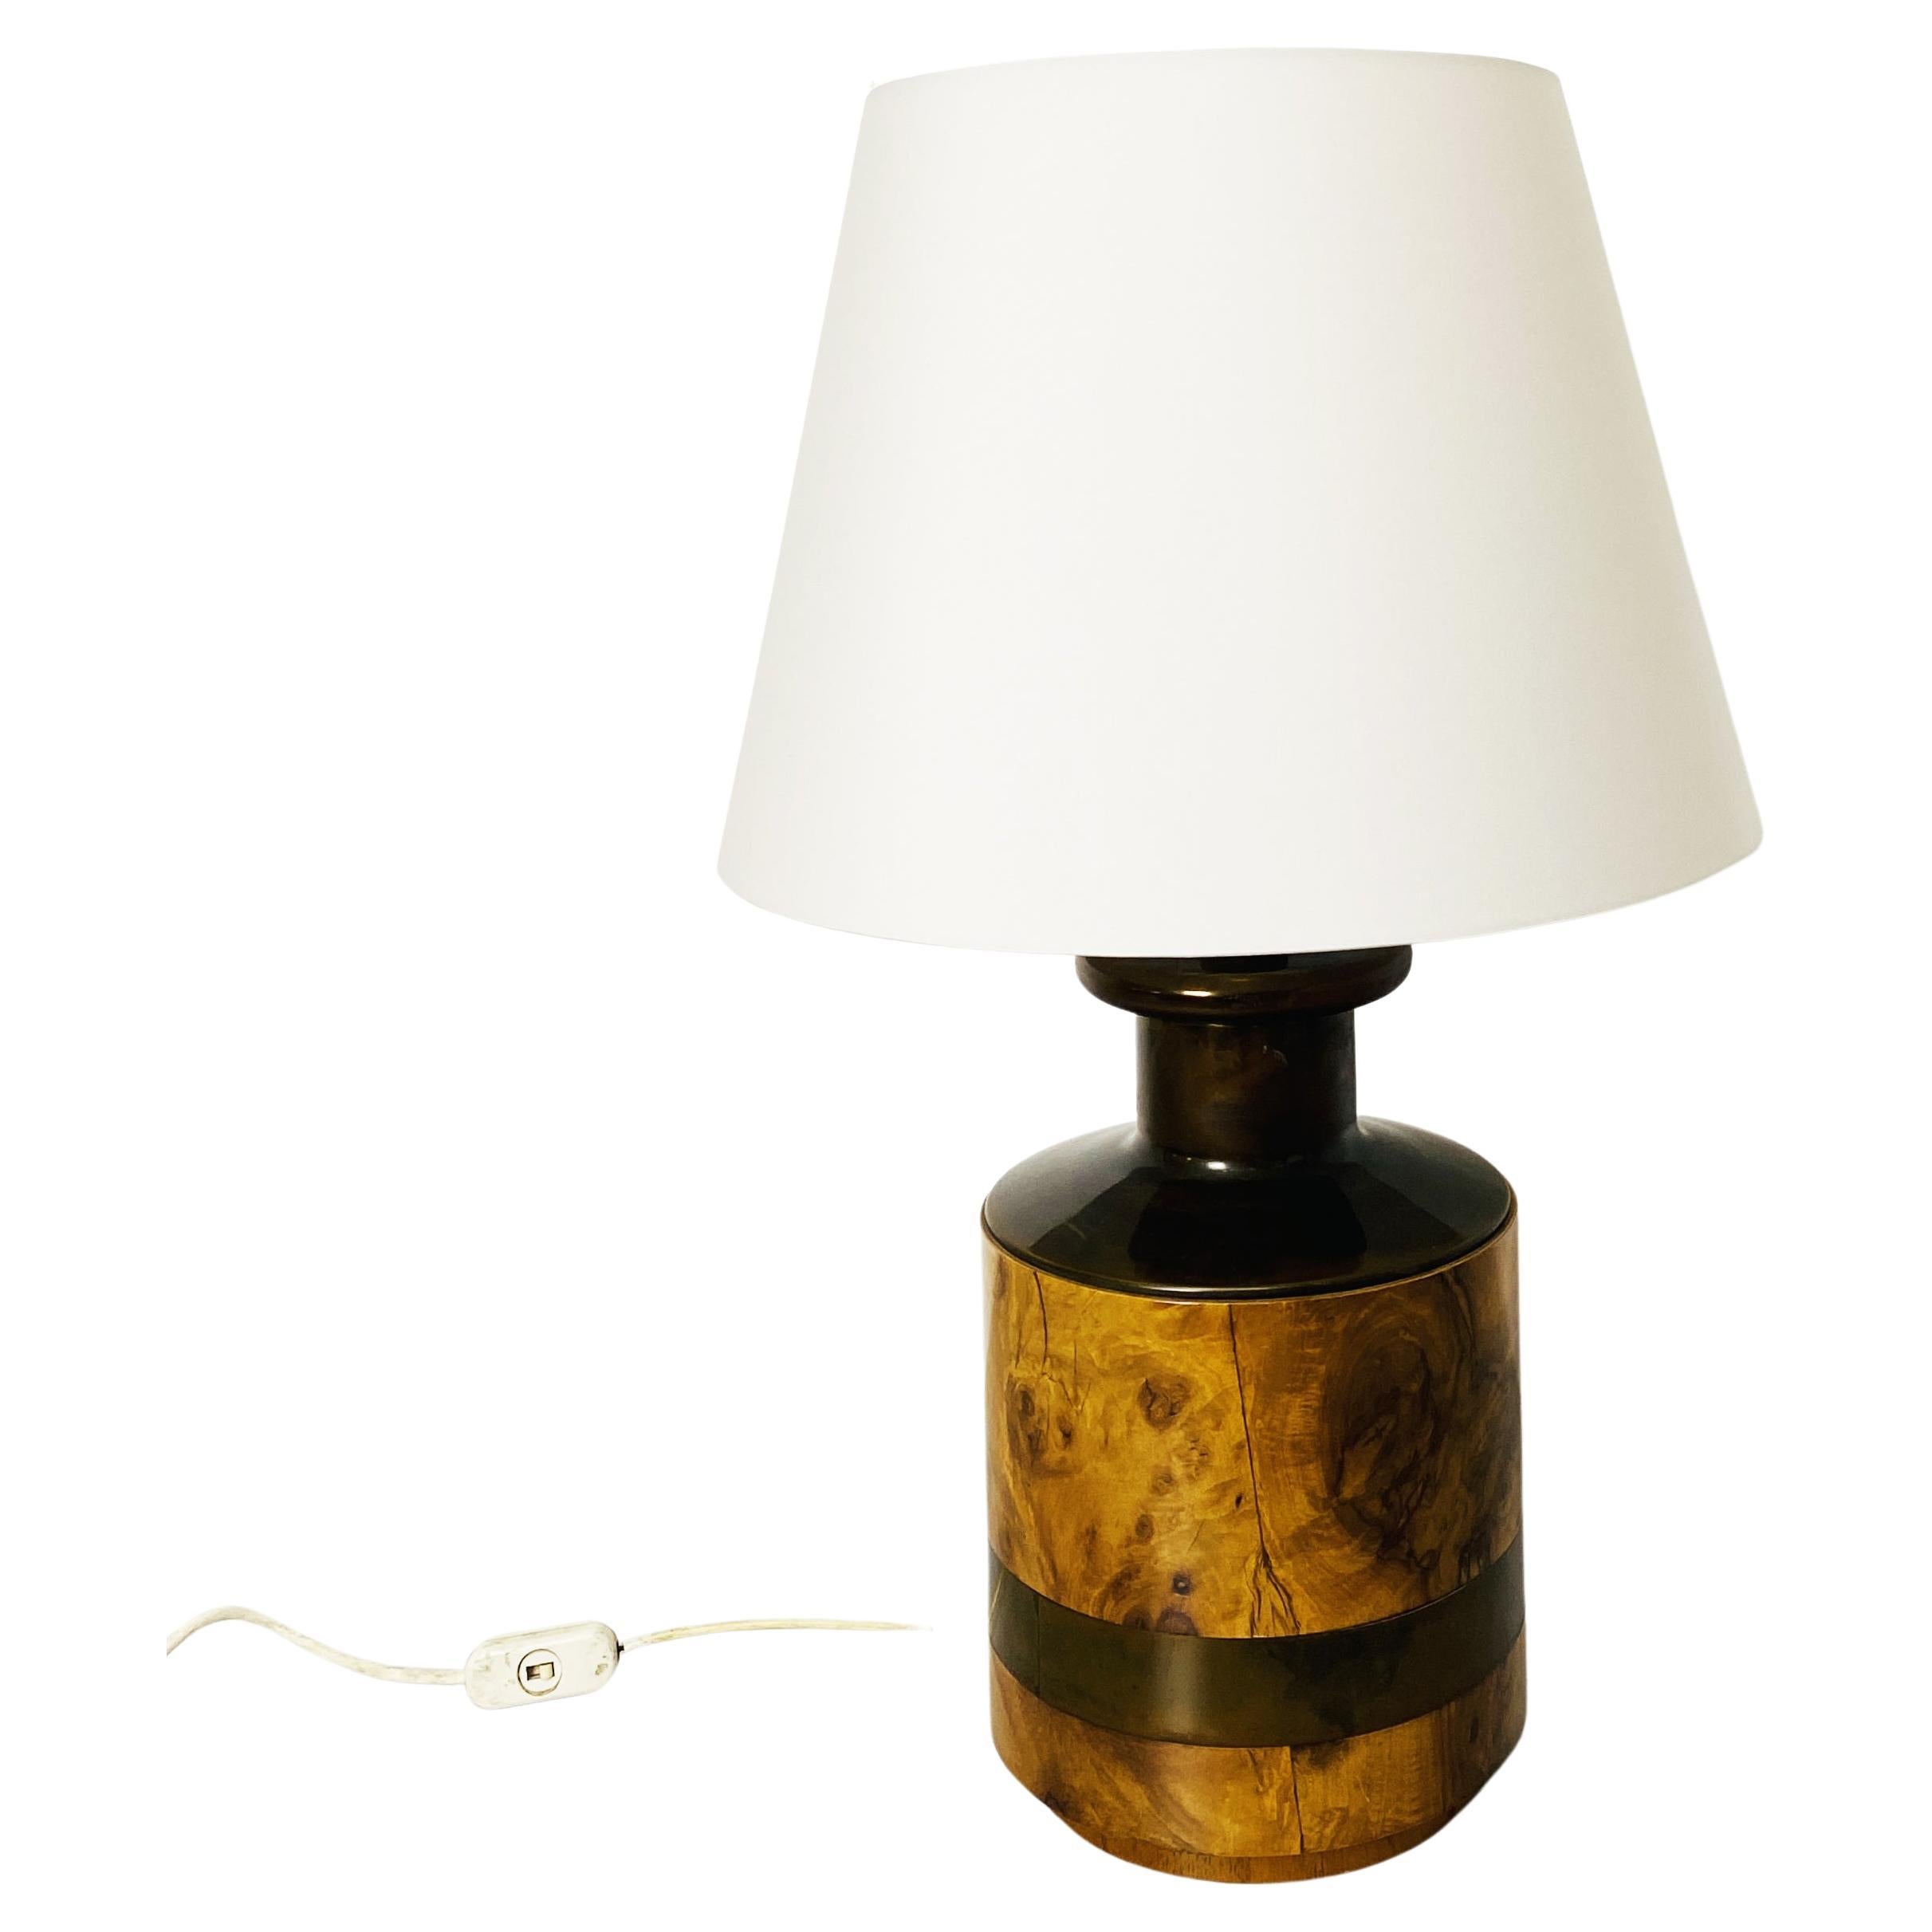 Italian Mid-Century Briar and Metal Table Lamp with Opaque White Fabric, 1960s